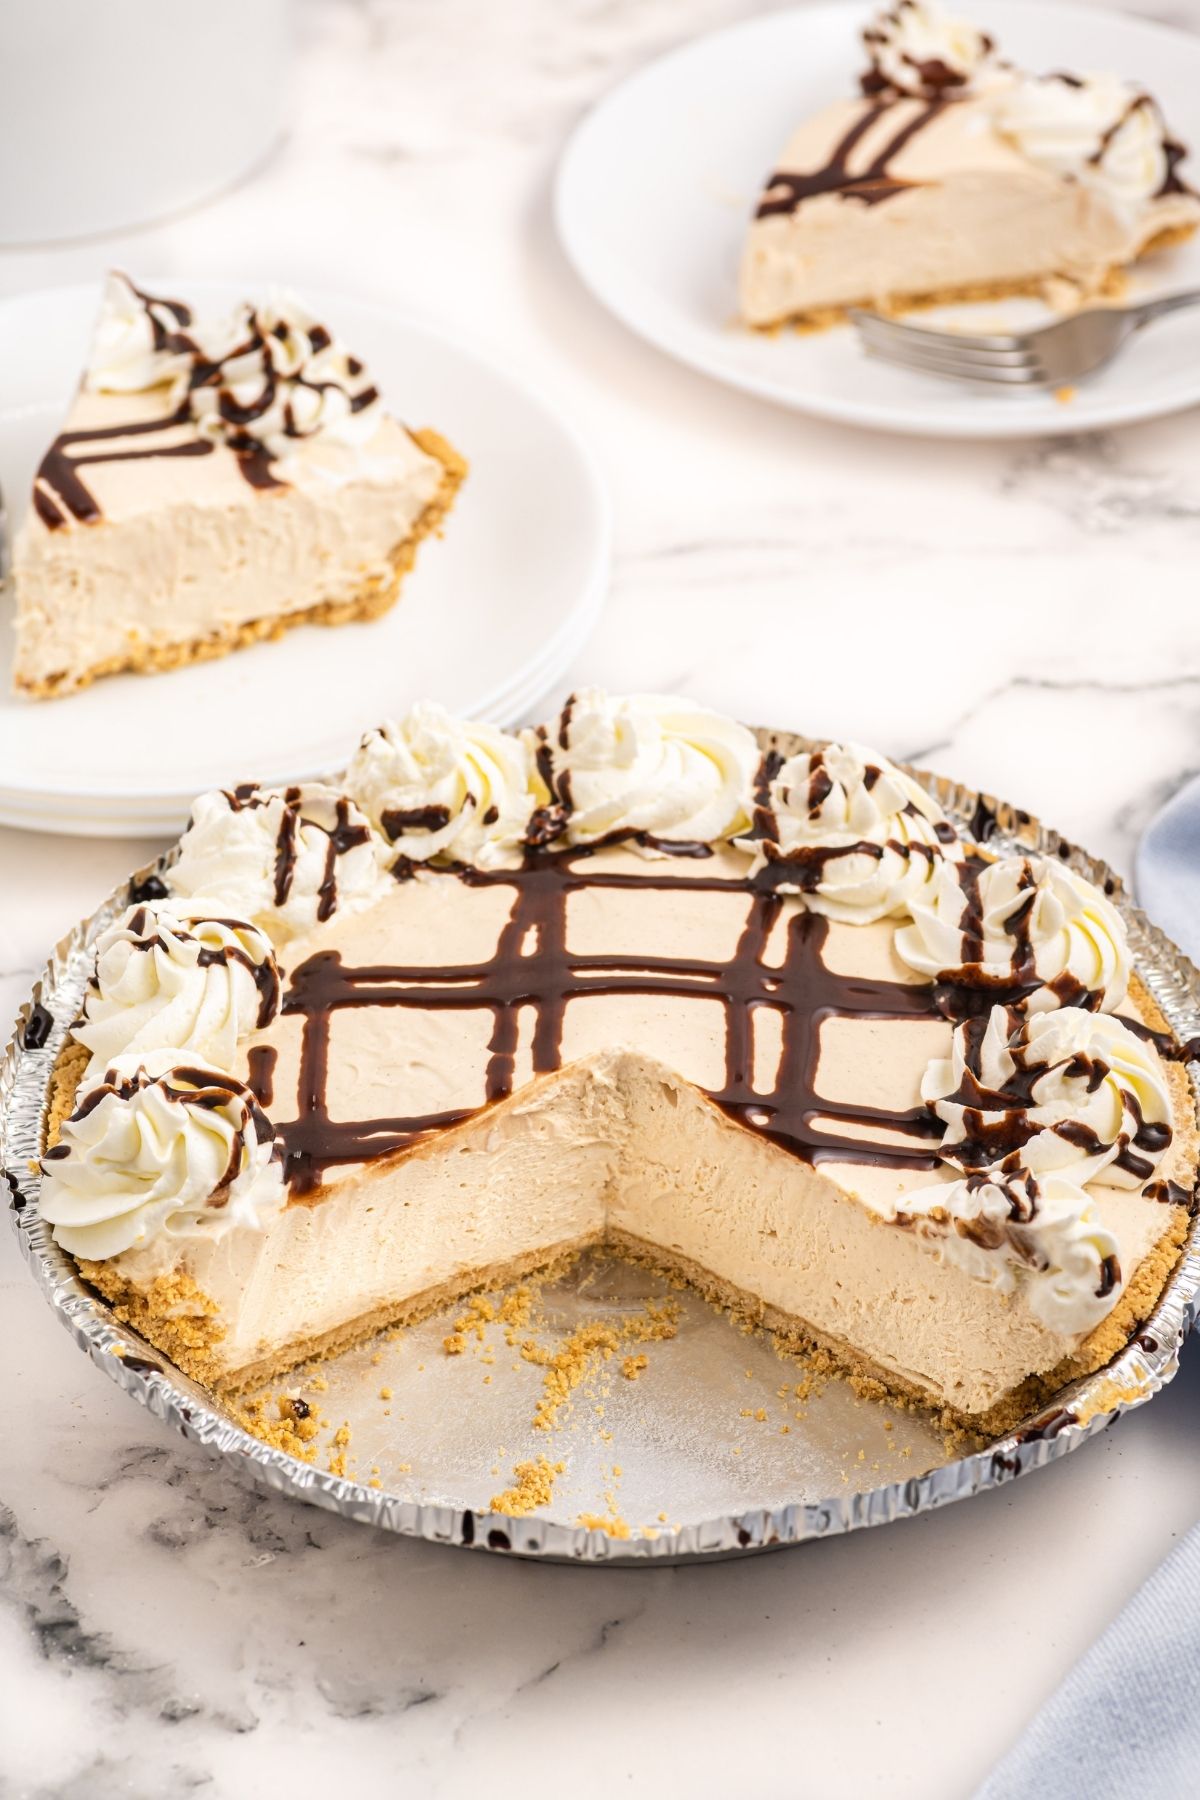 peanut butter pie with two slices taken out showing the inside smooth edges, whipped cream around edge with criss cross chocolate on top